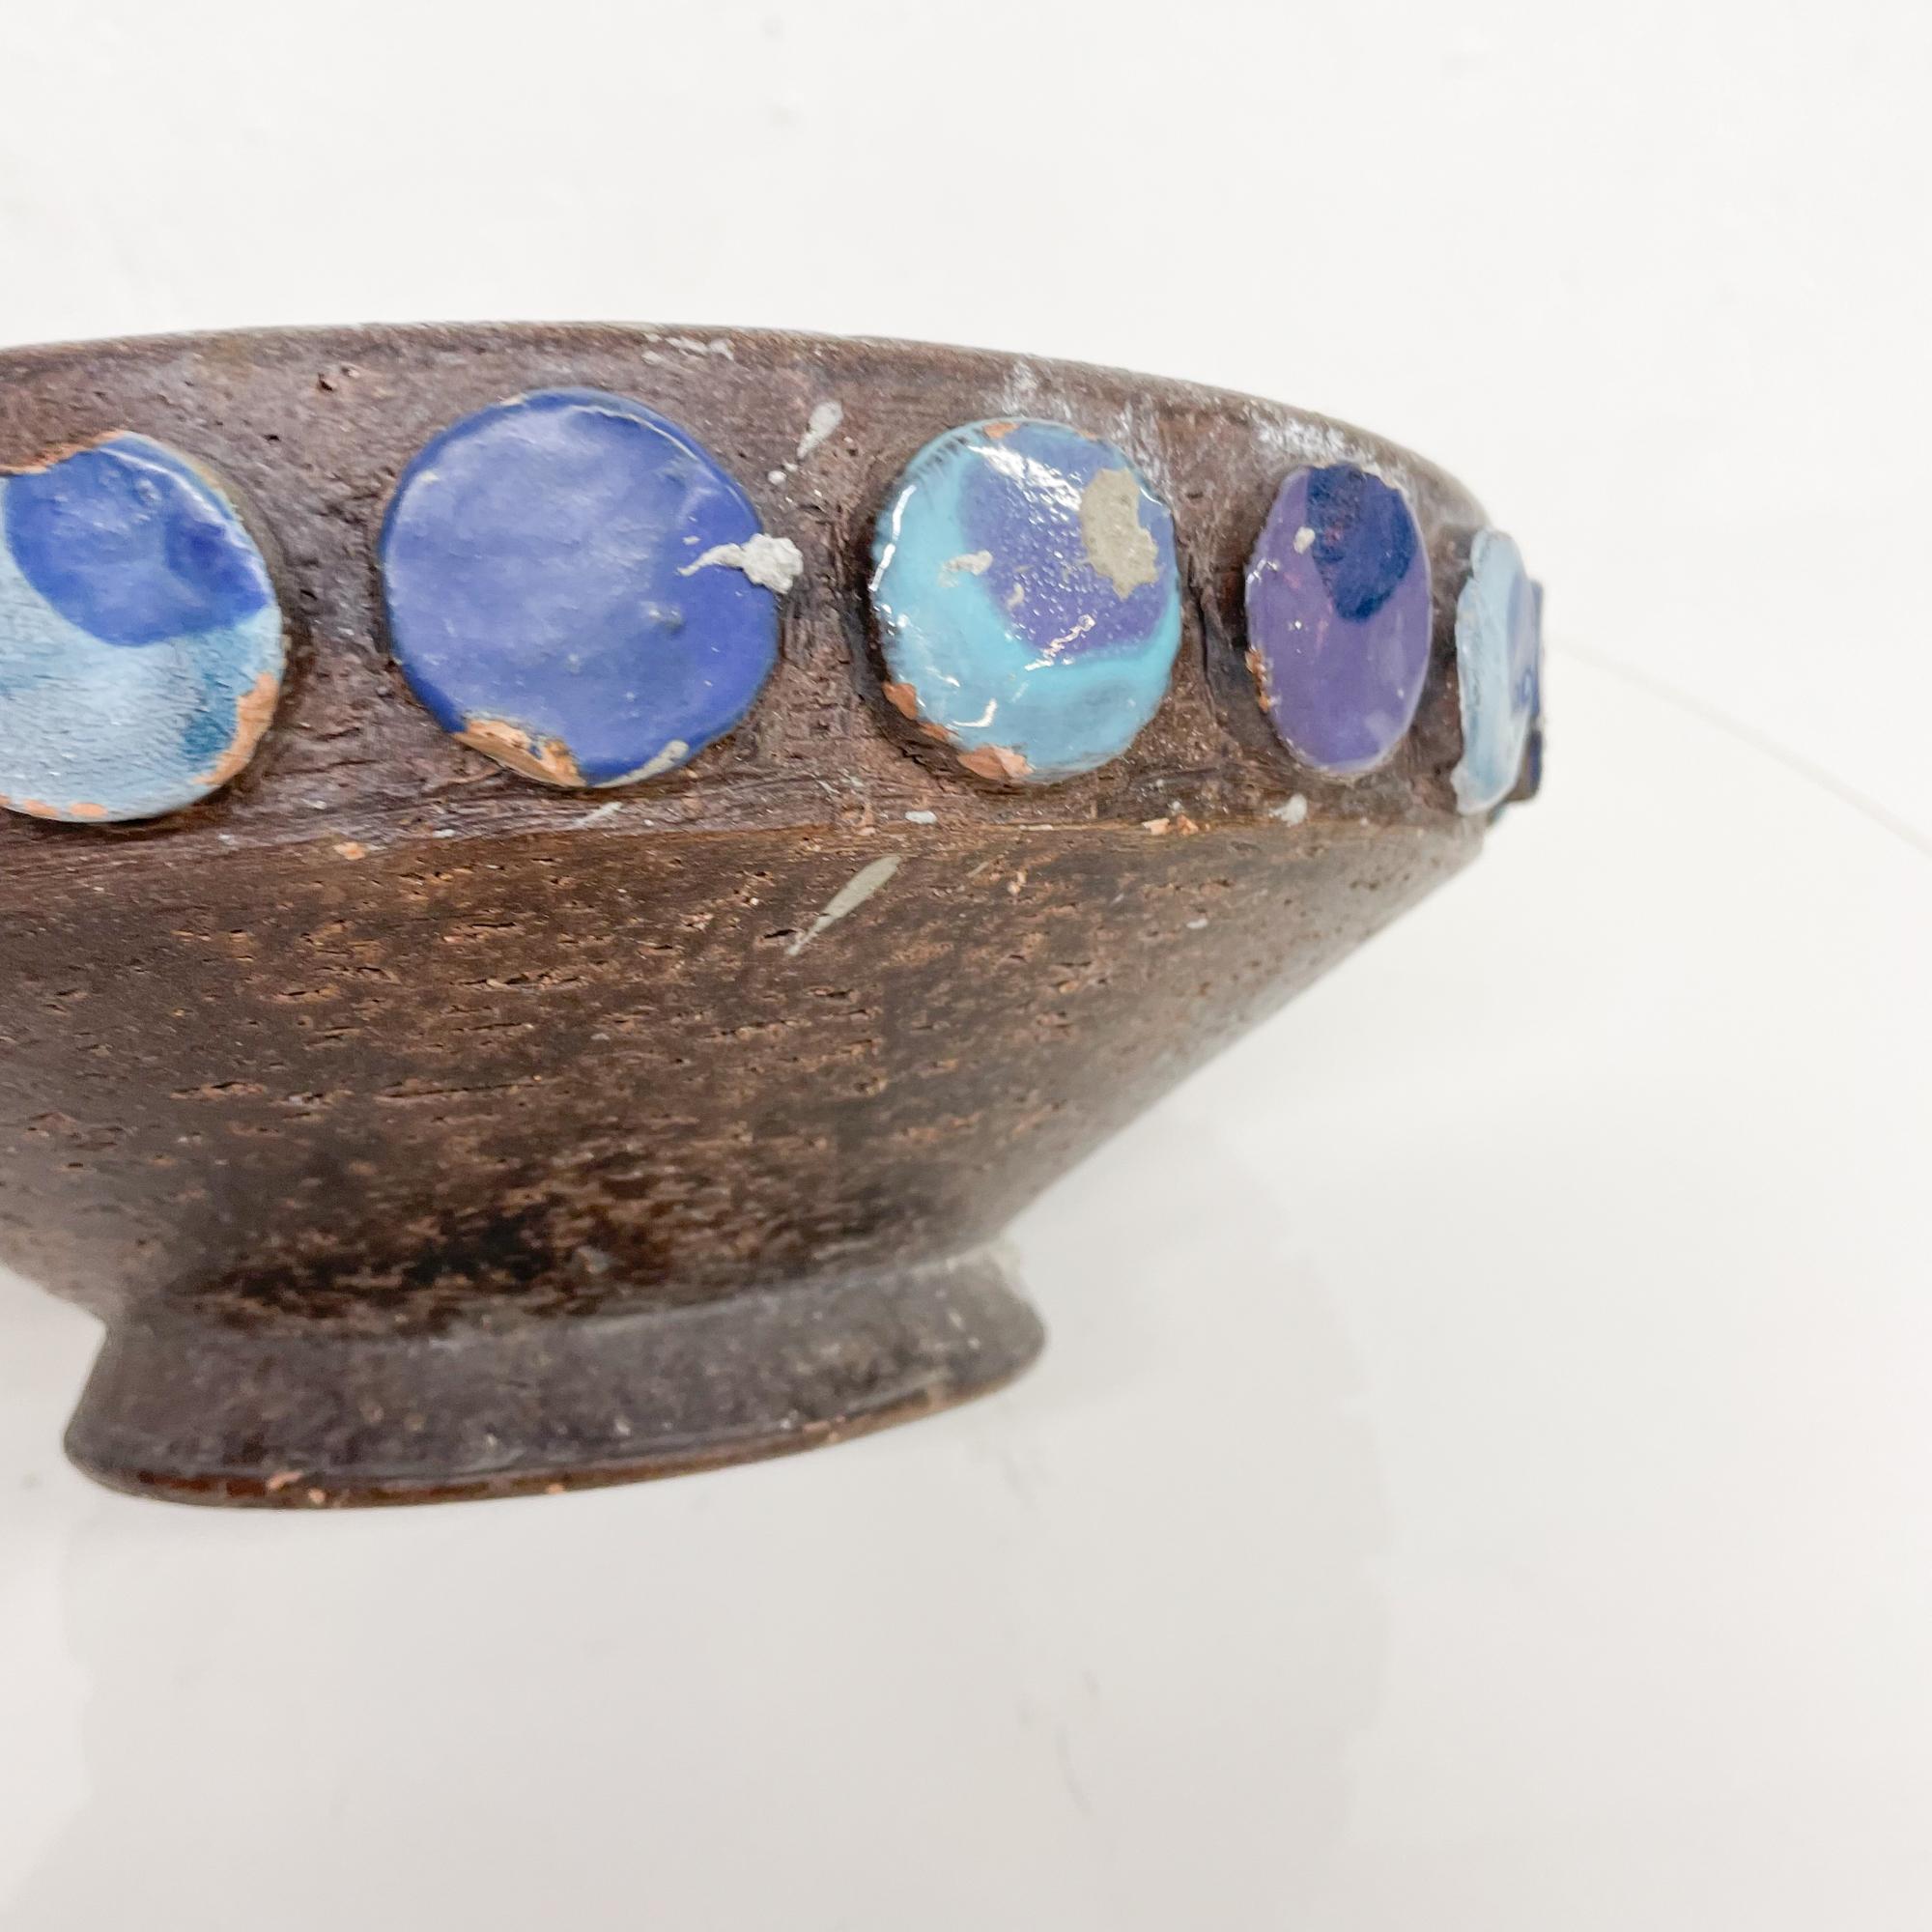 Ceramic 1960s Raymor Bitossi  Dish Blue Pottery Bowl Italy For Sale